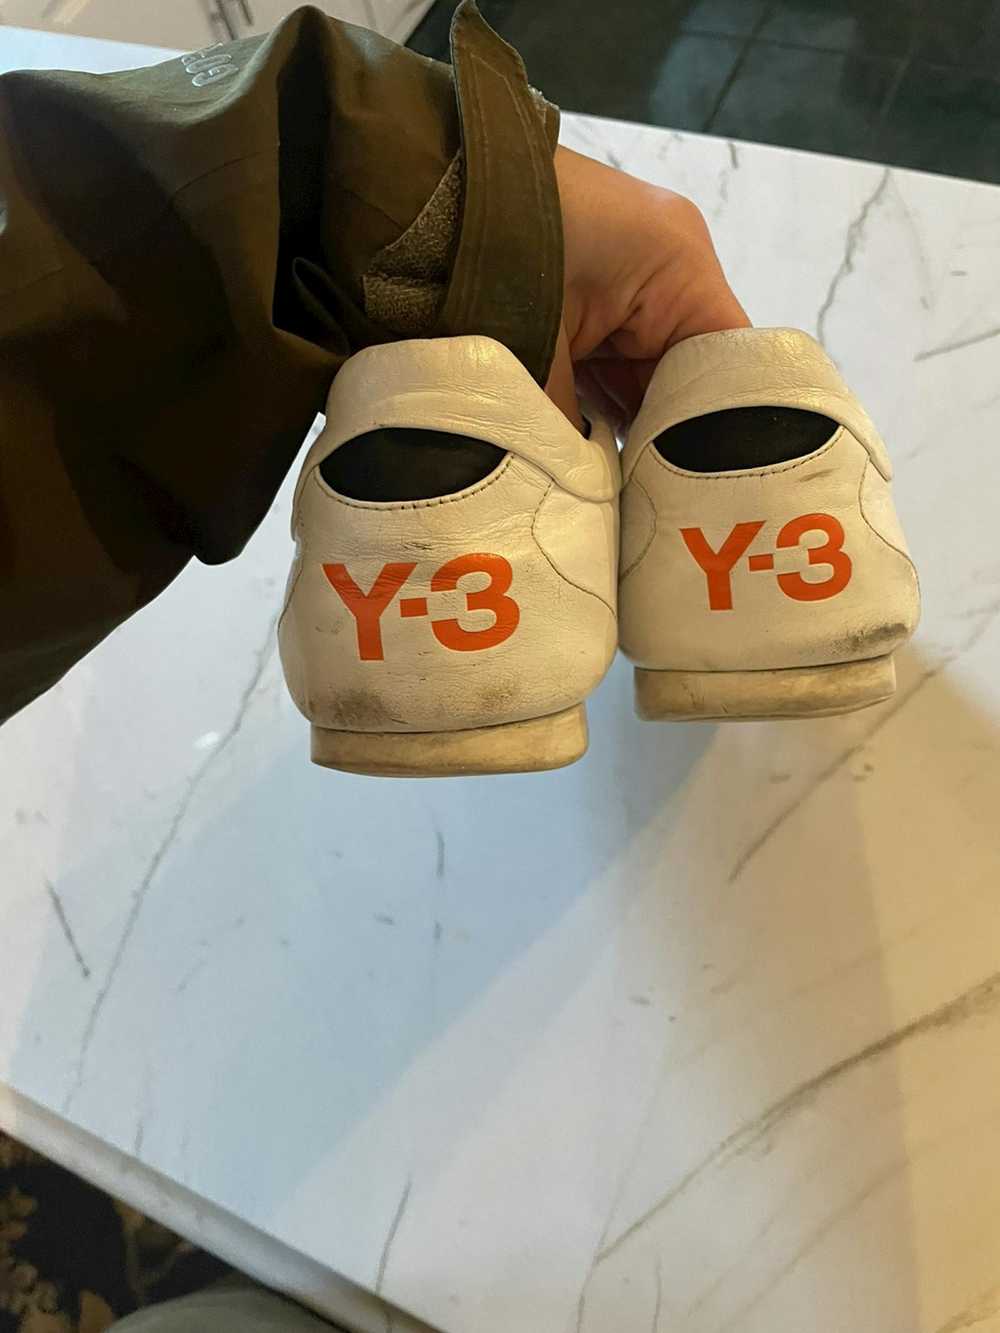 Y-3 Y-3 Yamamoto white leather low top sneakers - image 4